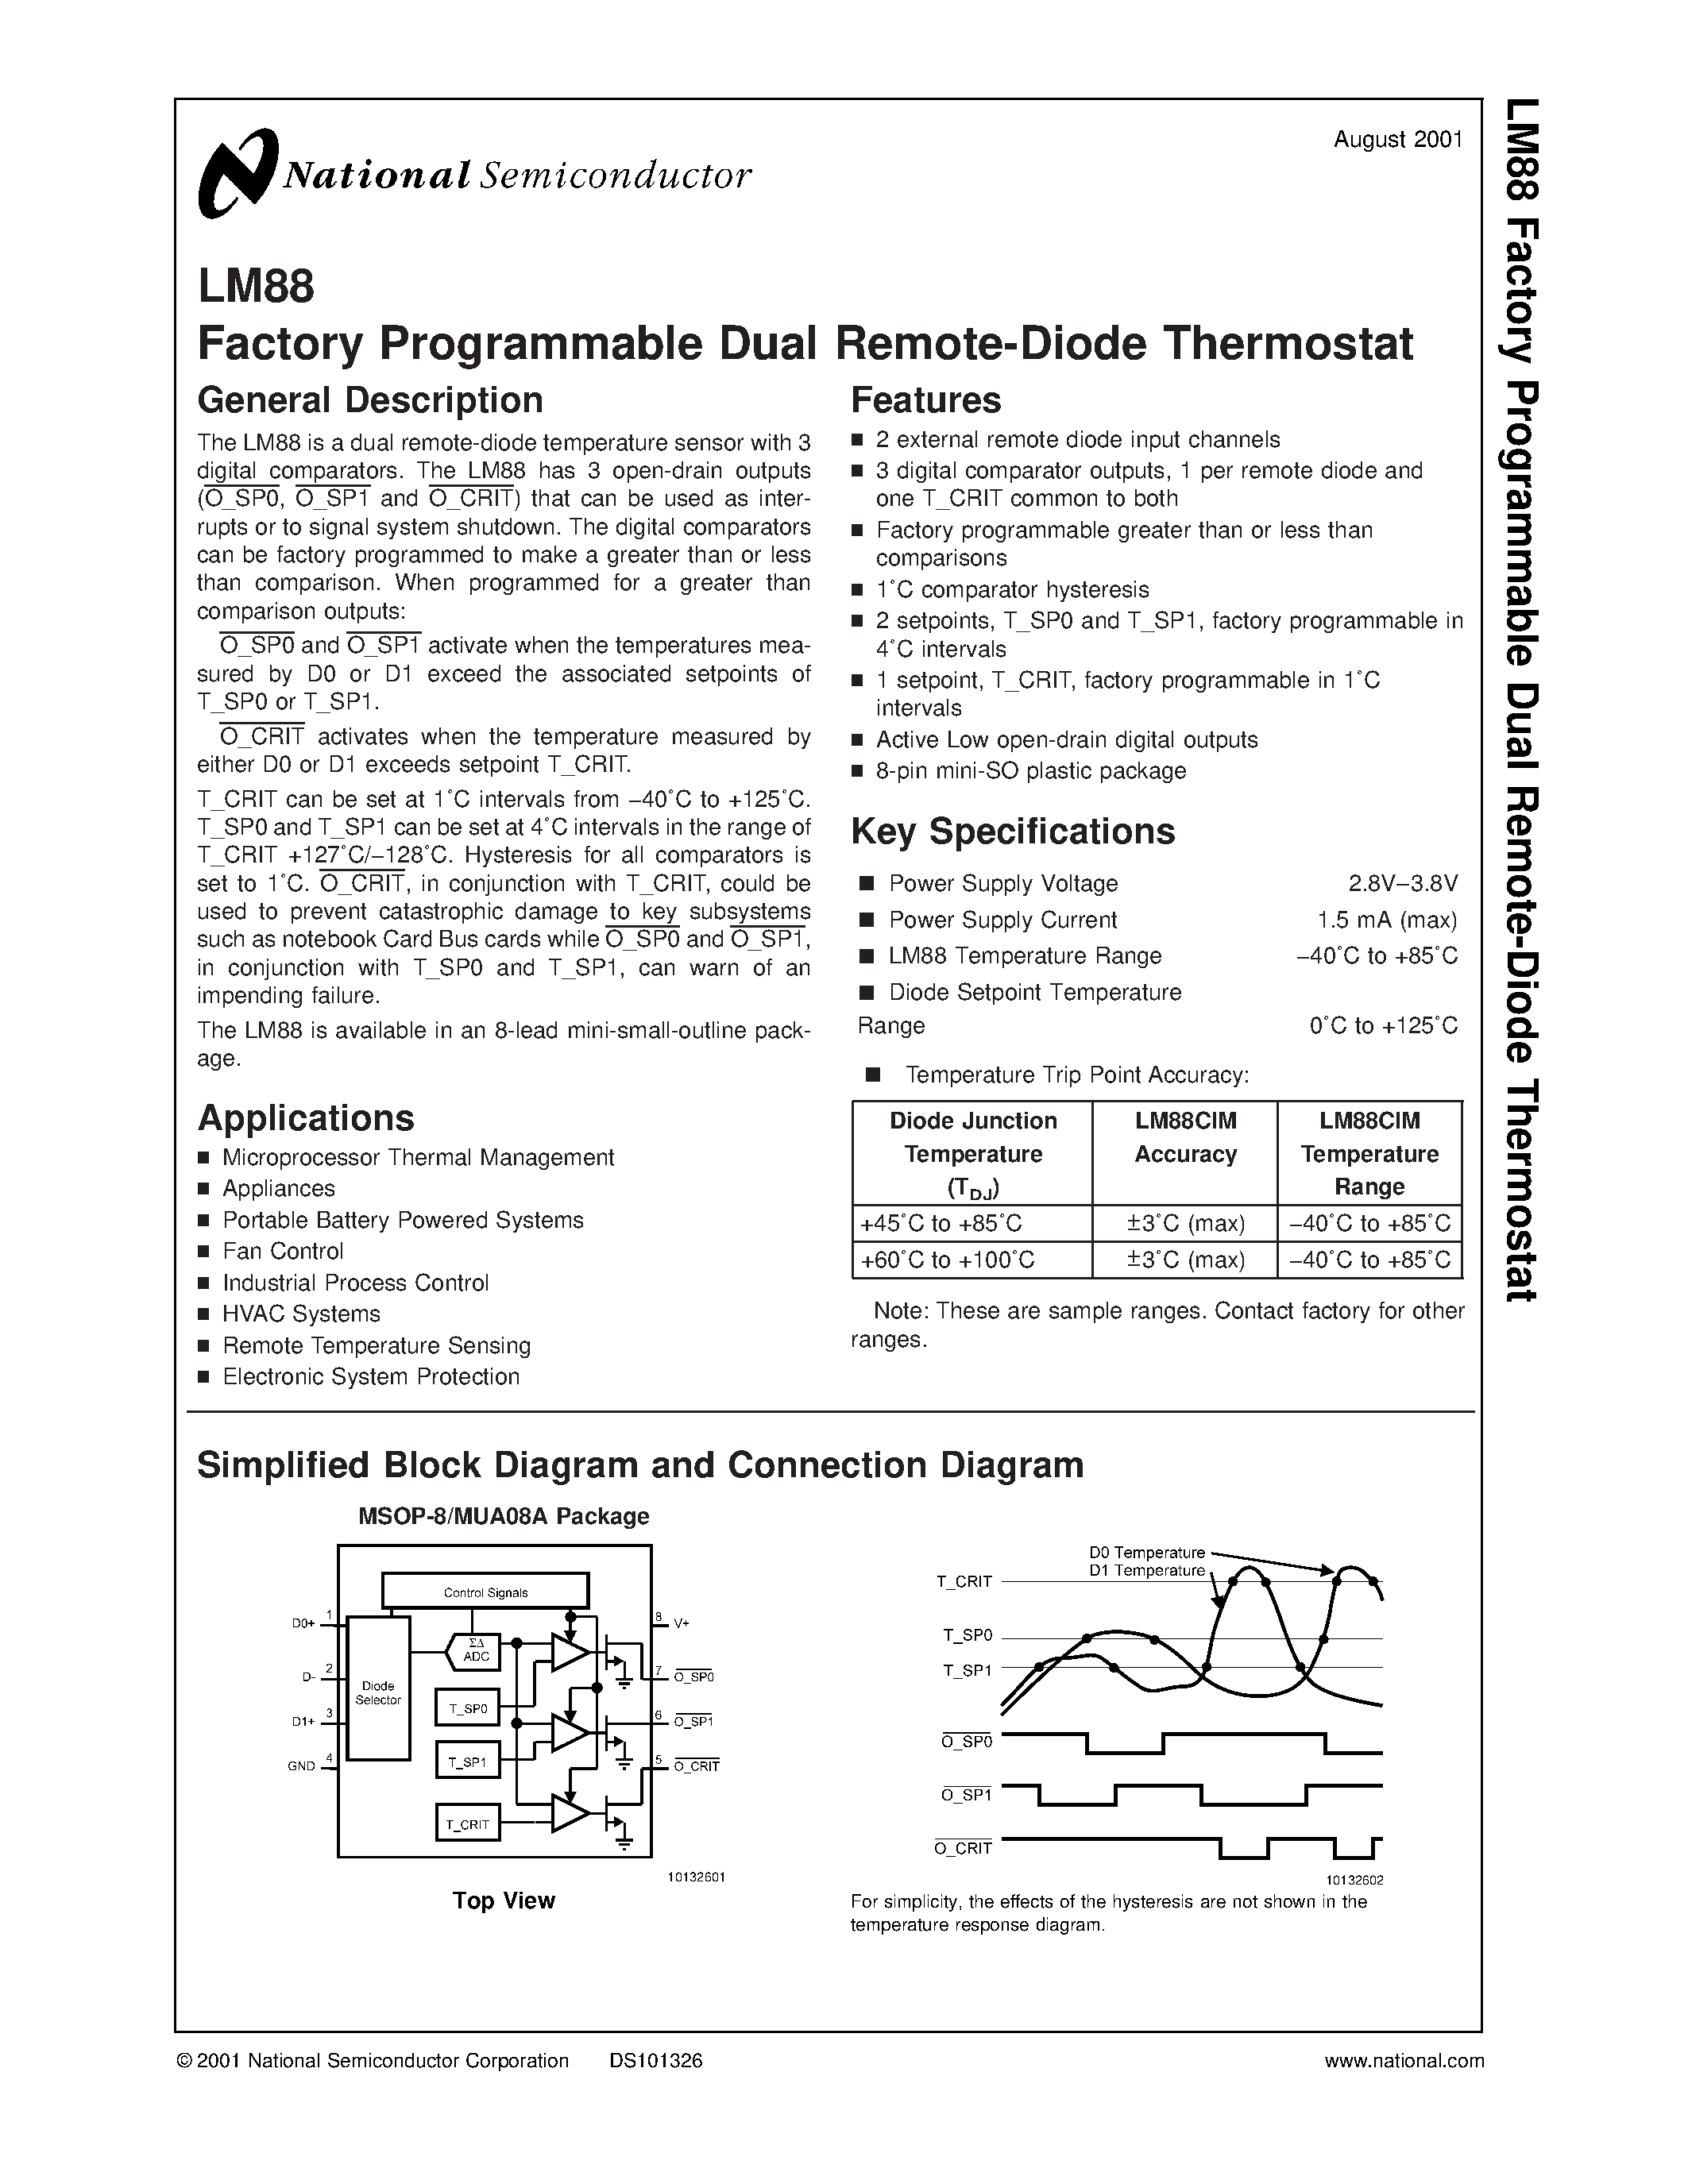 Даташит LM88 - Factory Programmable Dual Remote-Diode Thermostat страница 1